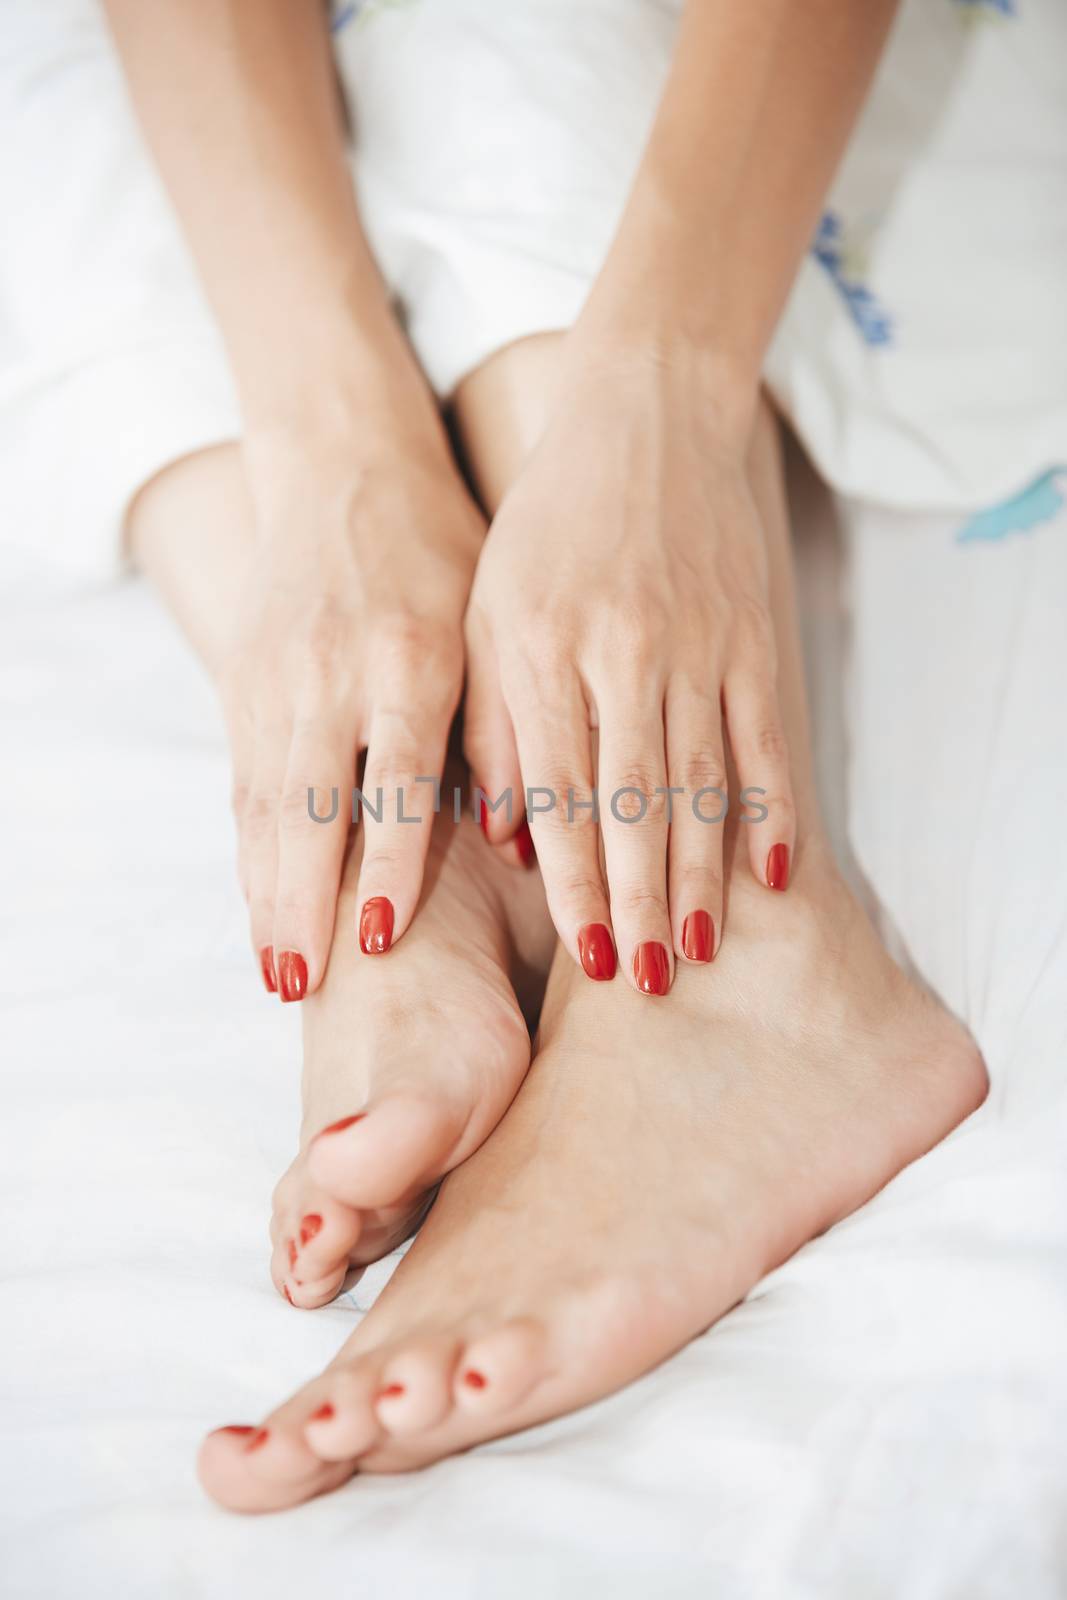 Woman feet and hands with red nail polish